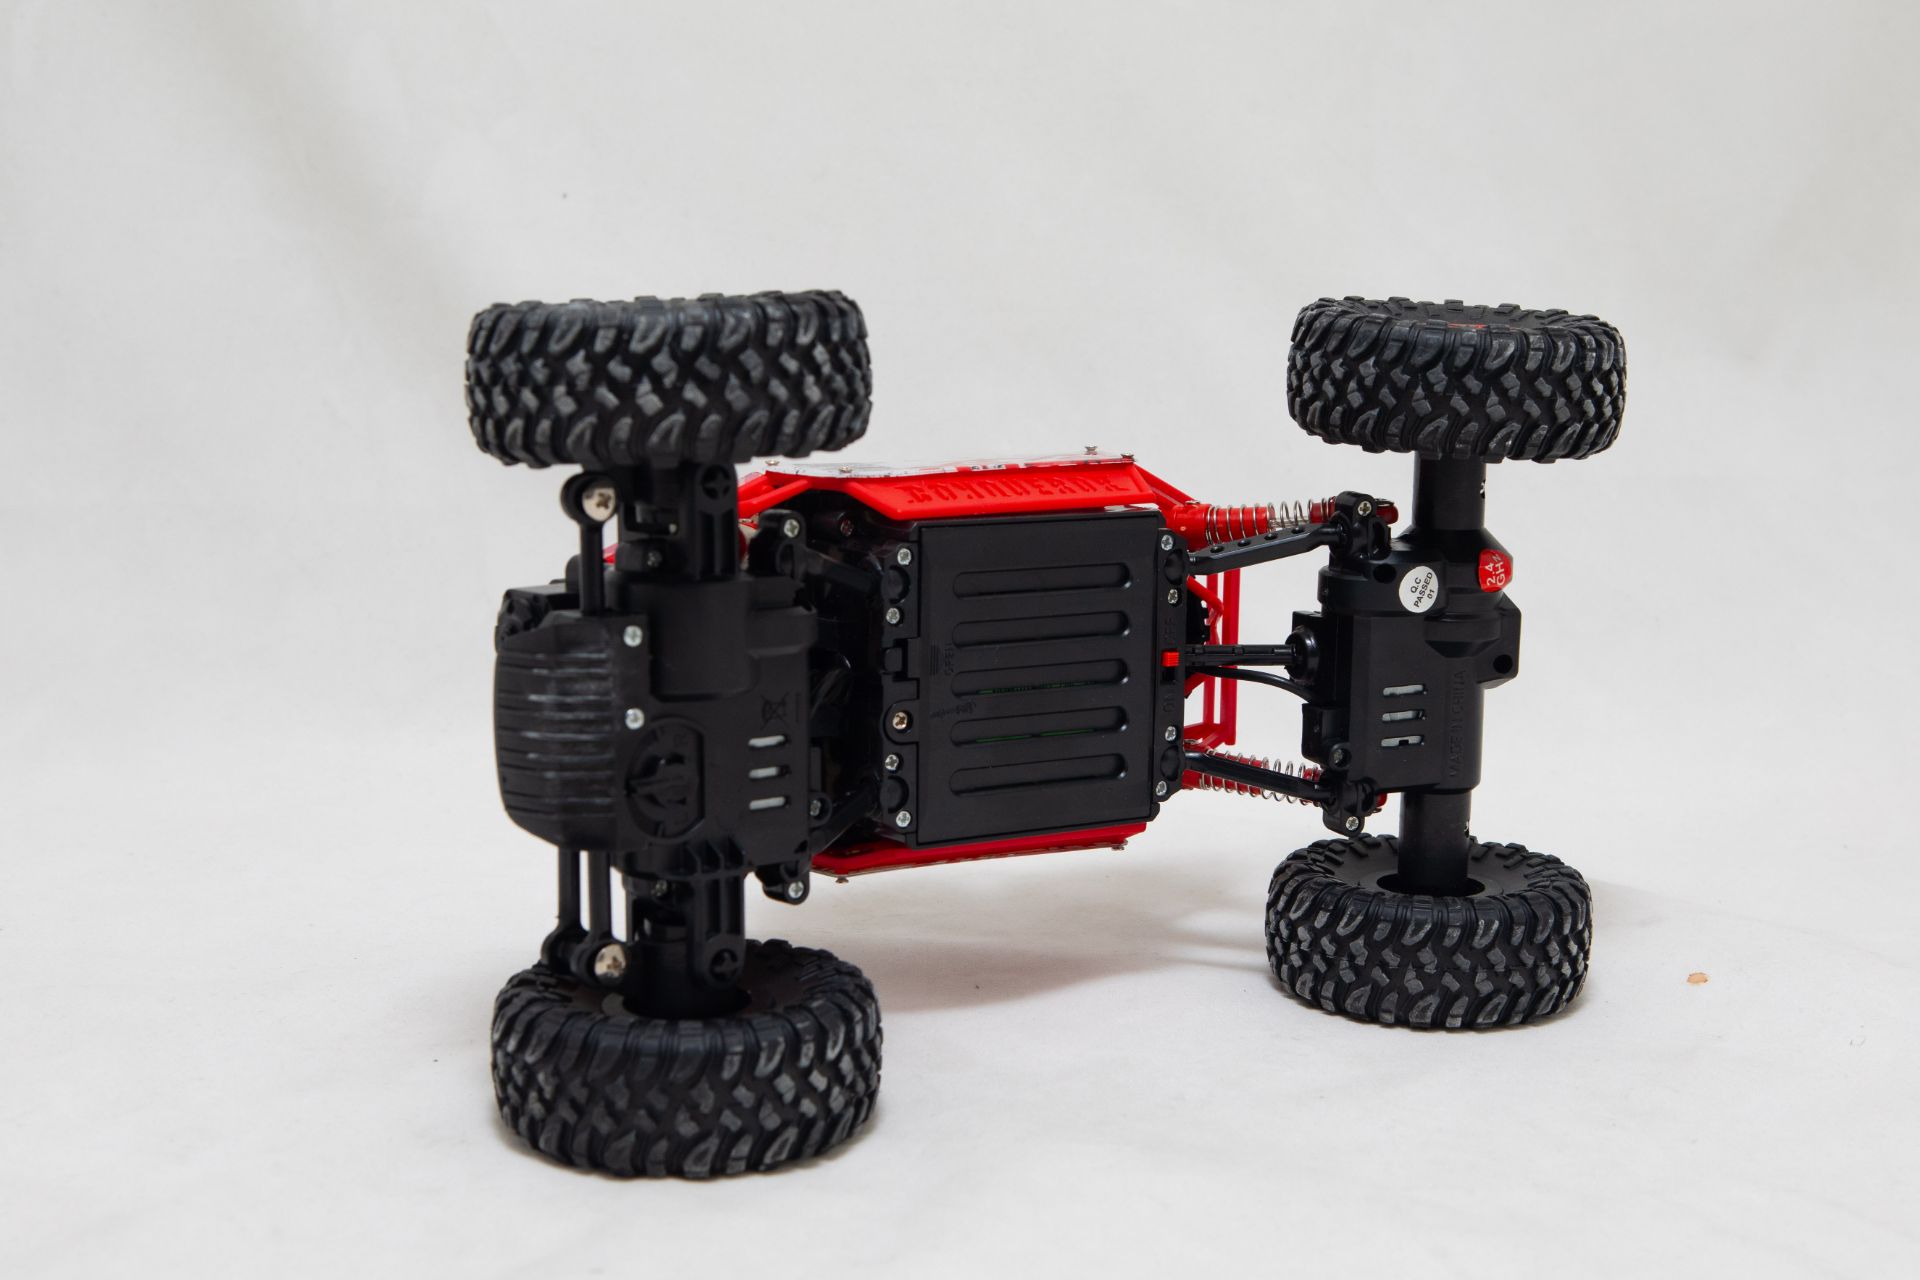 118 X ROCK CRAWLER - REMOTE CONTROL OFF ROAD TRUCK - Image 8 of 9